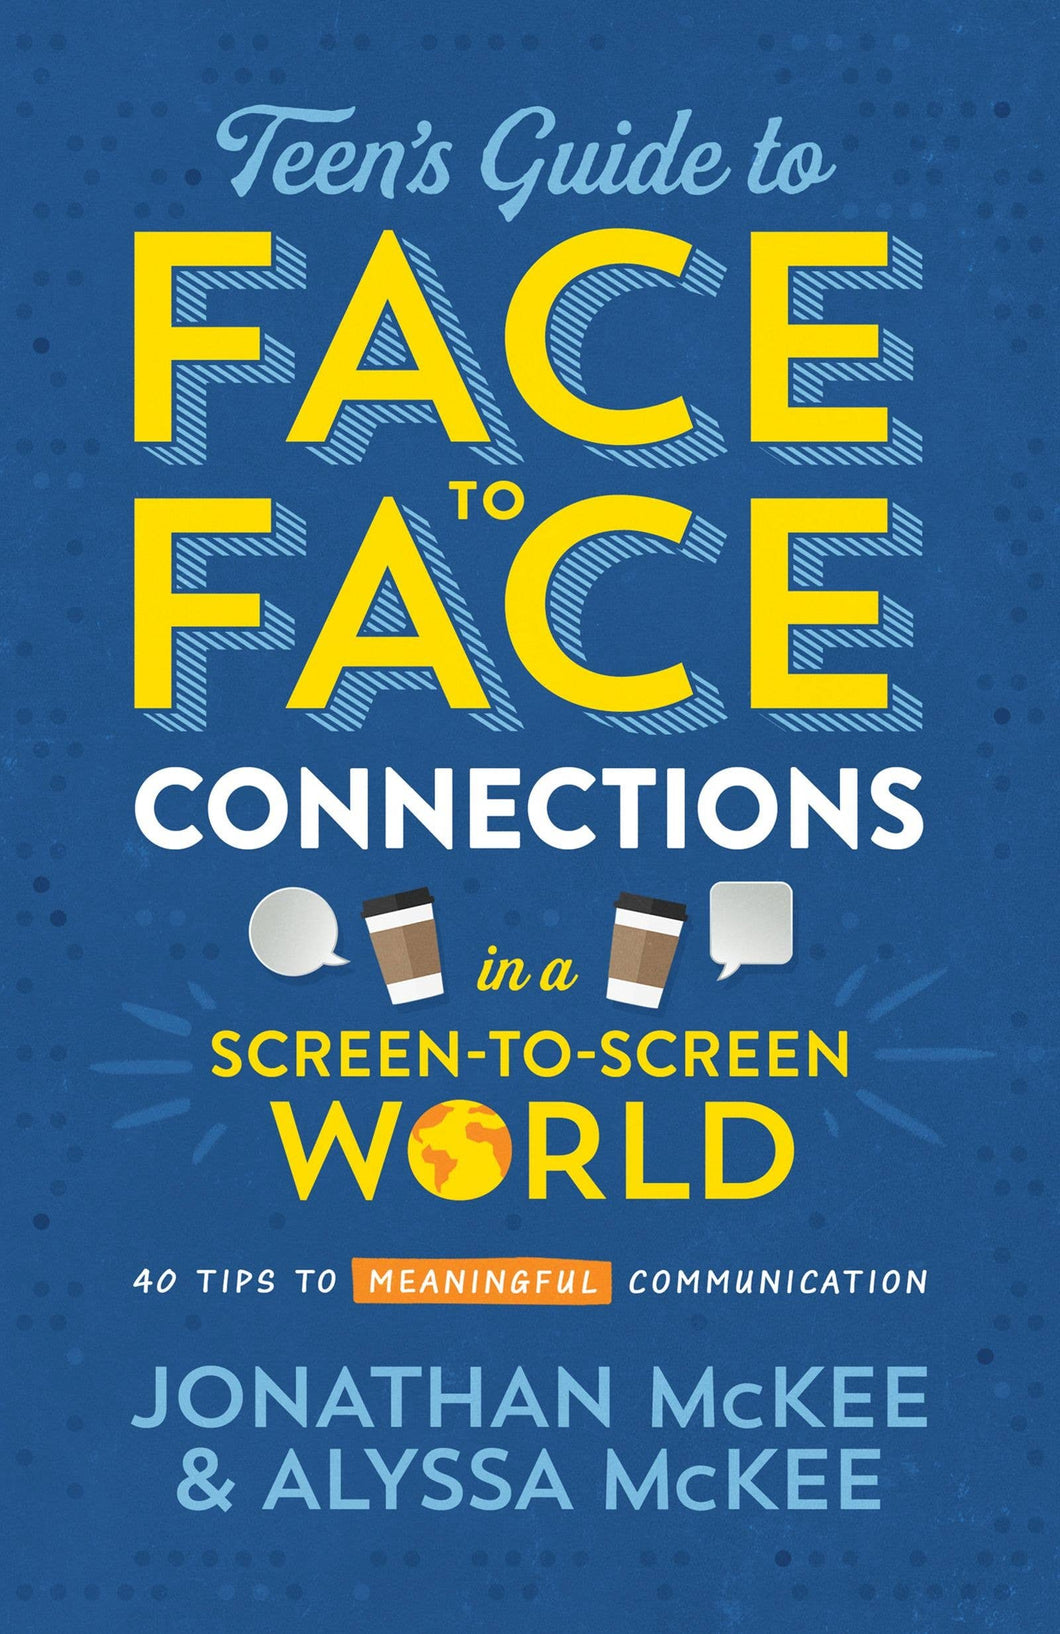 Teen's Guide to Face-To-Face Connection